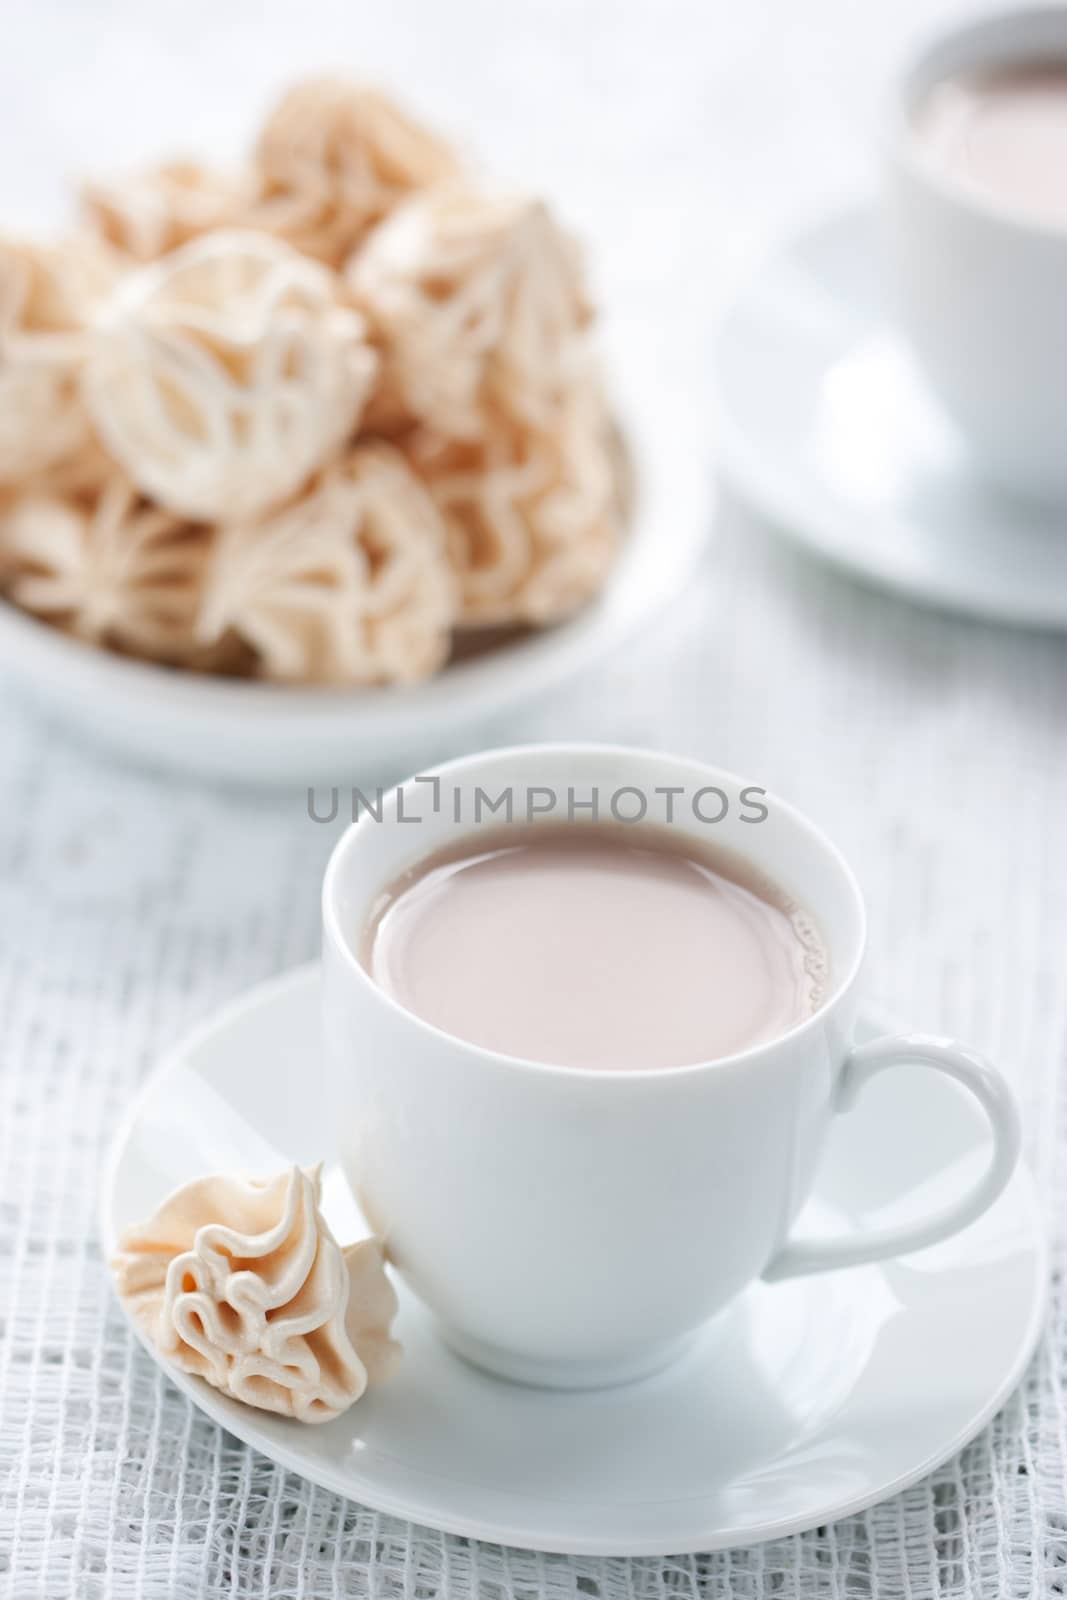 Meringues and cup of chocolate drink, shallow dof.